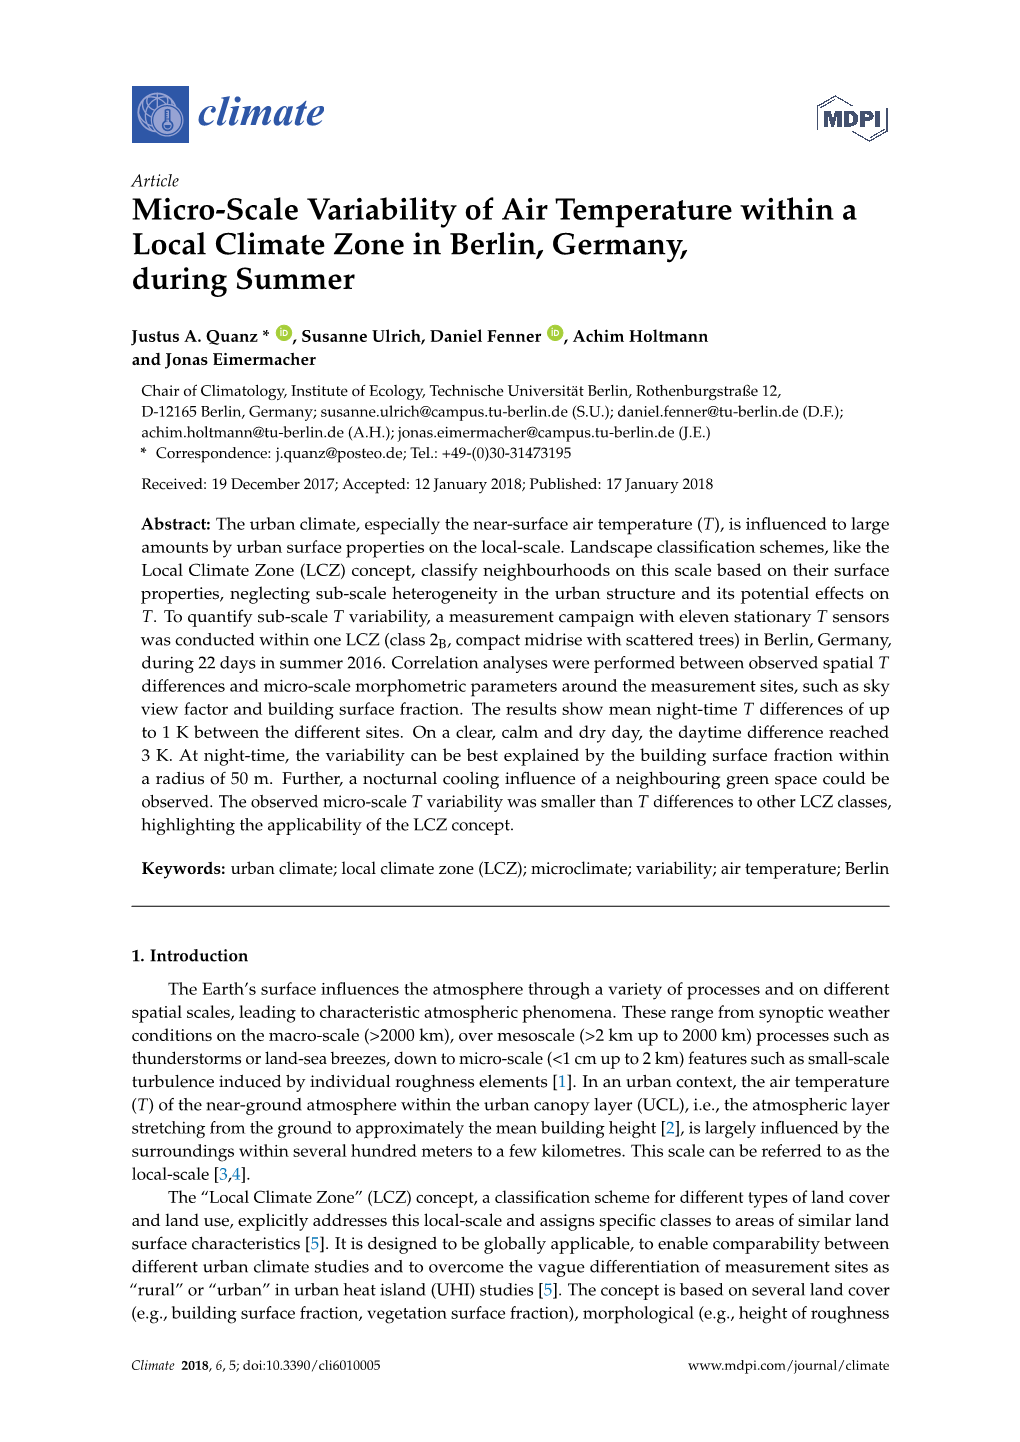 Micro-Scale Variability of Air Temperature Within a Local Climate Zone in Berlin, Germany, During Summer